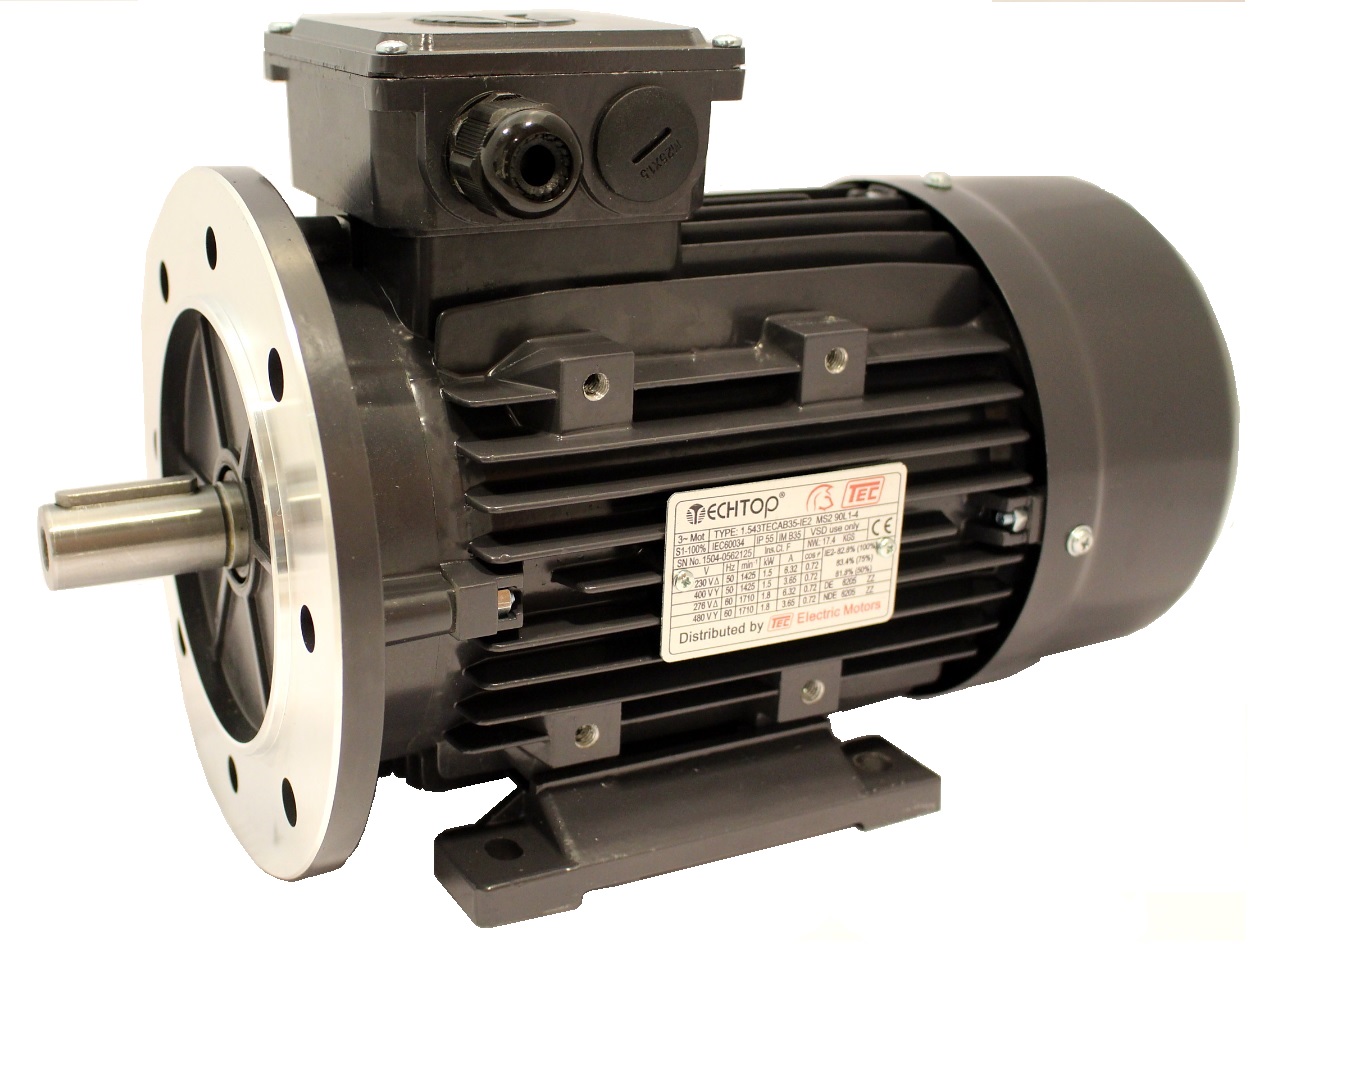 Three Phase 400v Electric Motor, 2.2Kw 2 pole 2910rpm with flange and foot mount IE3